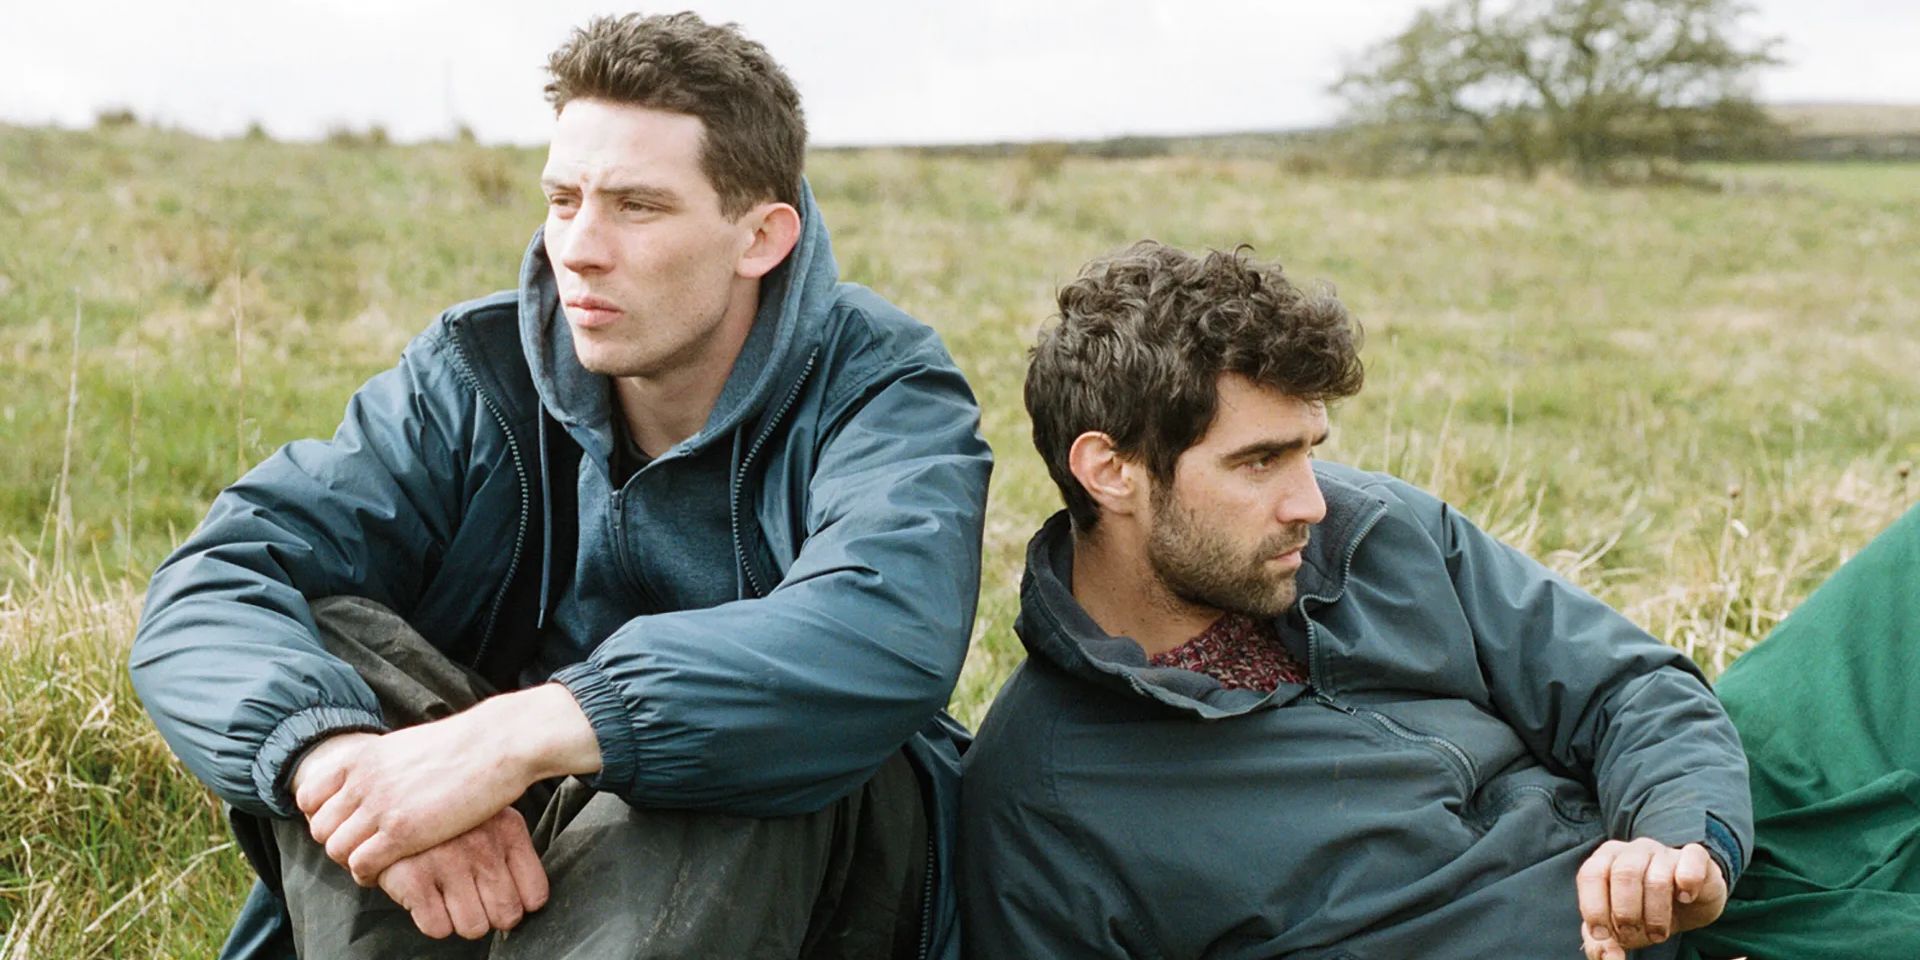 Johnny (Josh O’Connor) and Gheorghe (Alec Secăreanu) sit on a field, staring in different directions.